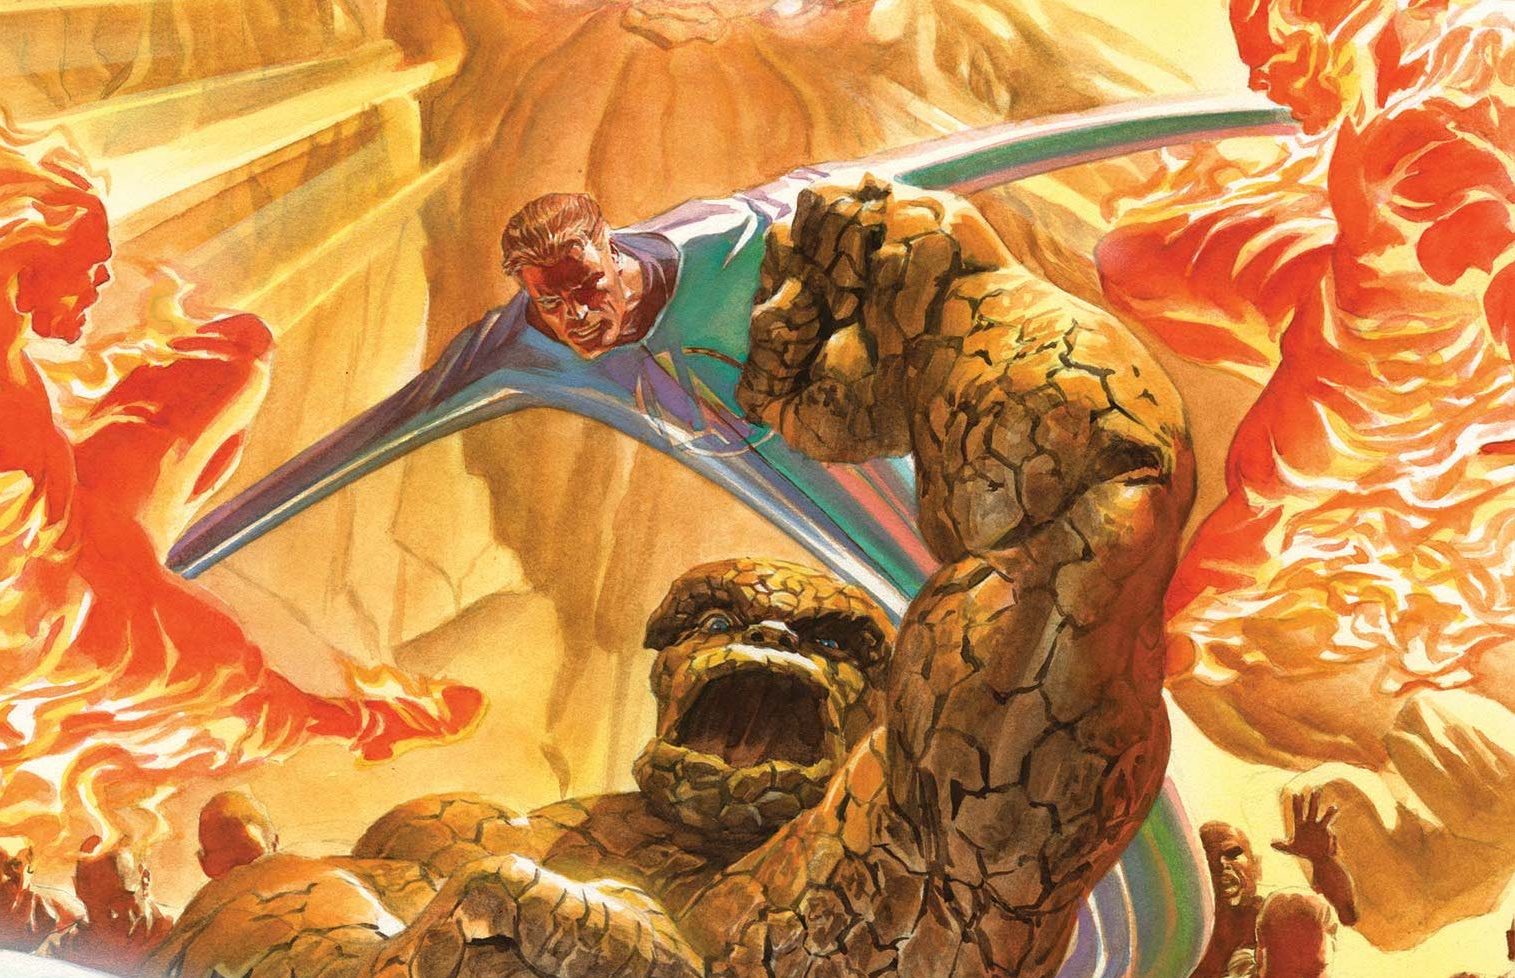 'Fantastic Four' #9 is an exciting, clever chapter in the series